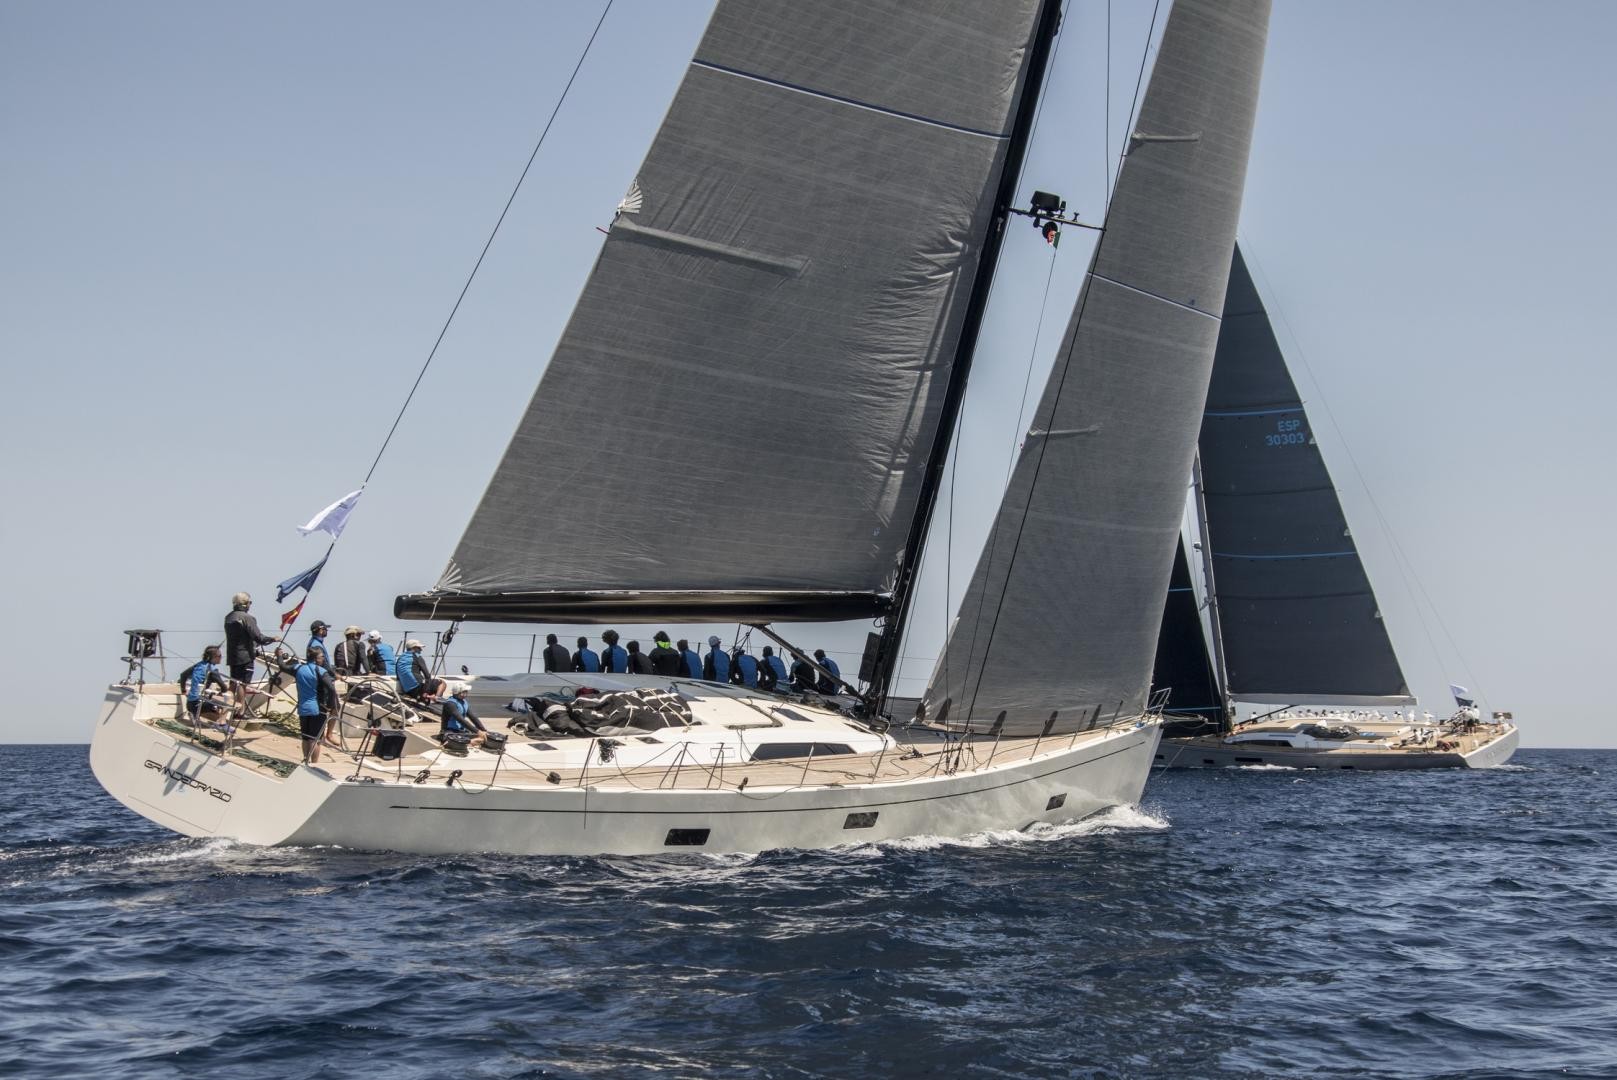 Southern Wind: SW105 Kiboko Tres shines in the gusty breeze